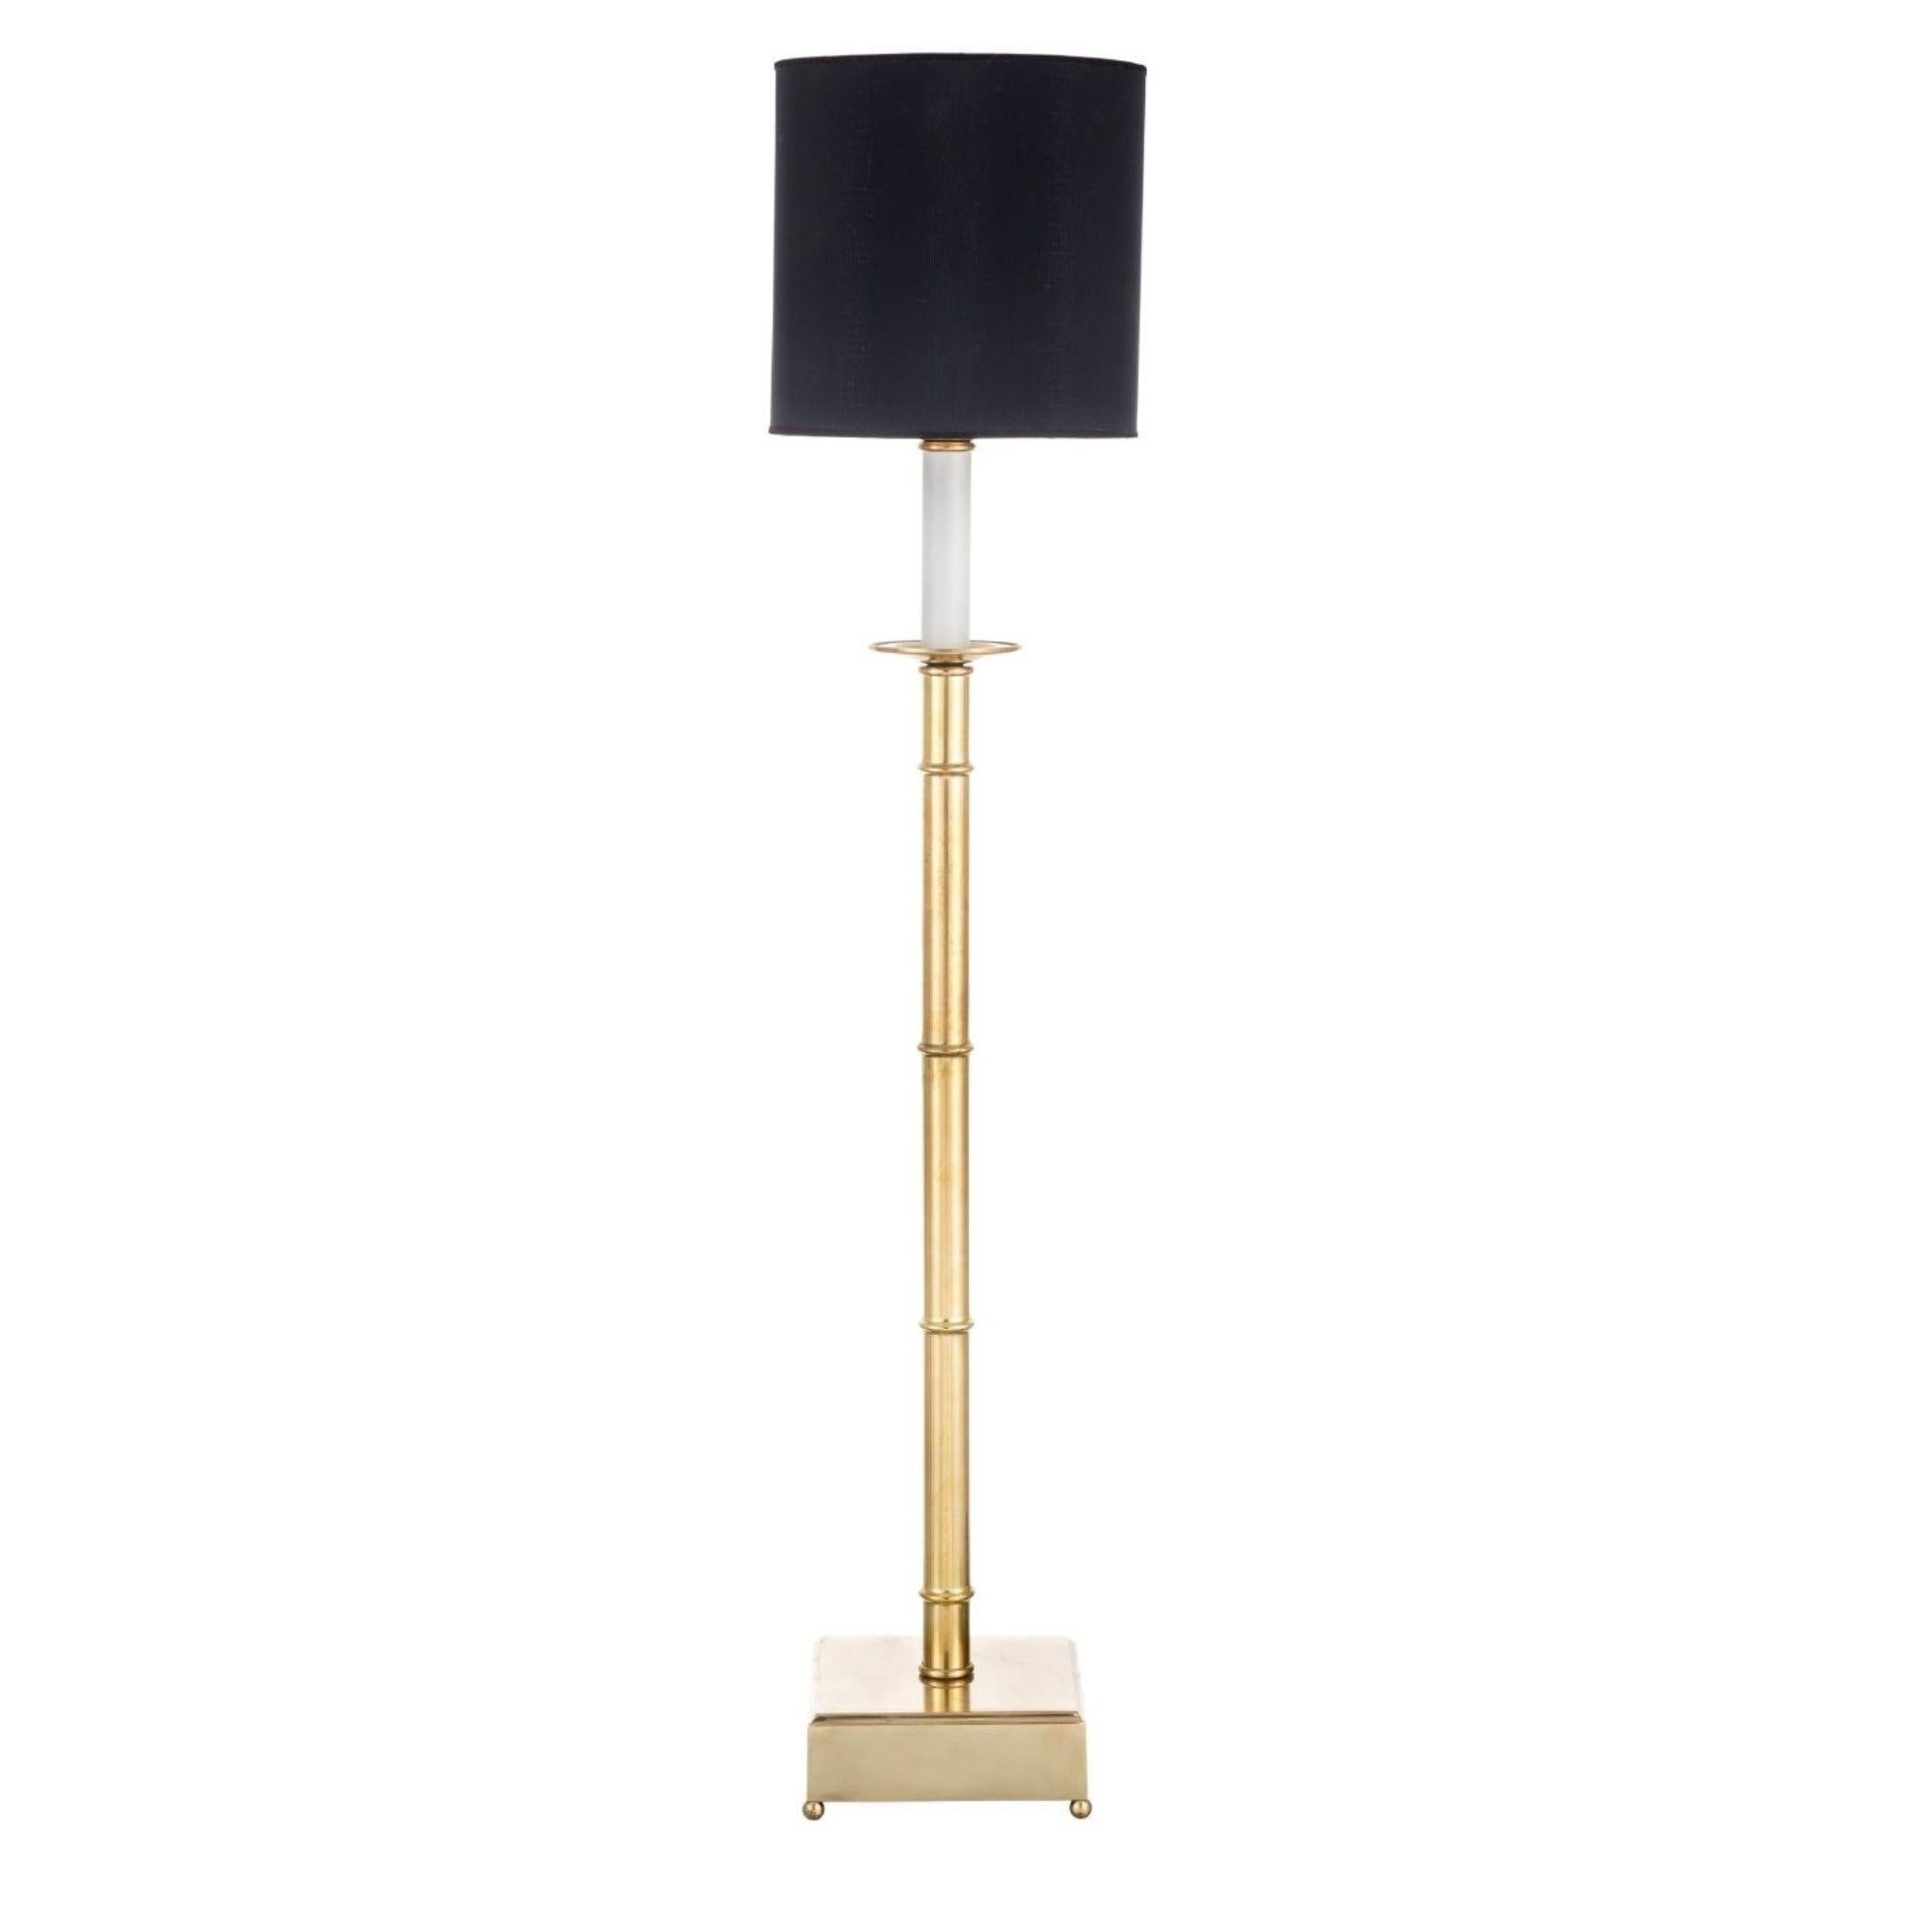 Enhance your living space with Novecento exquisite lamp featuring a stunning natural brass bamboo shaped structure, complemented by a sleek black fabric lampshade. This contemporary design effortlessly combines elegance and functionality, providing